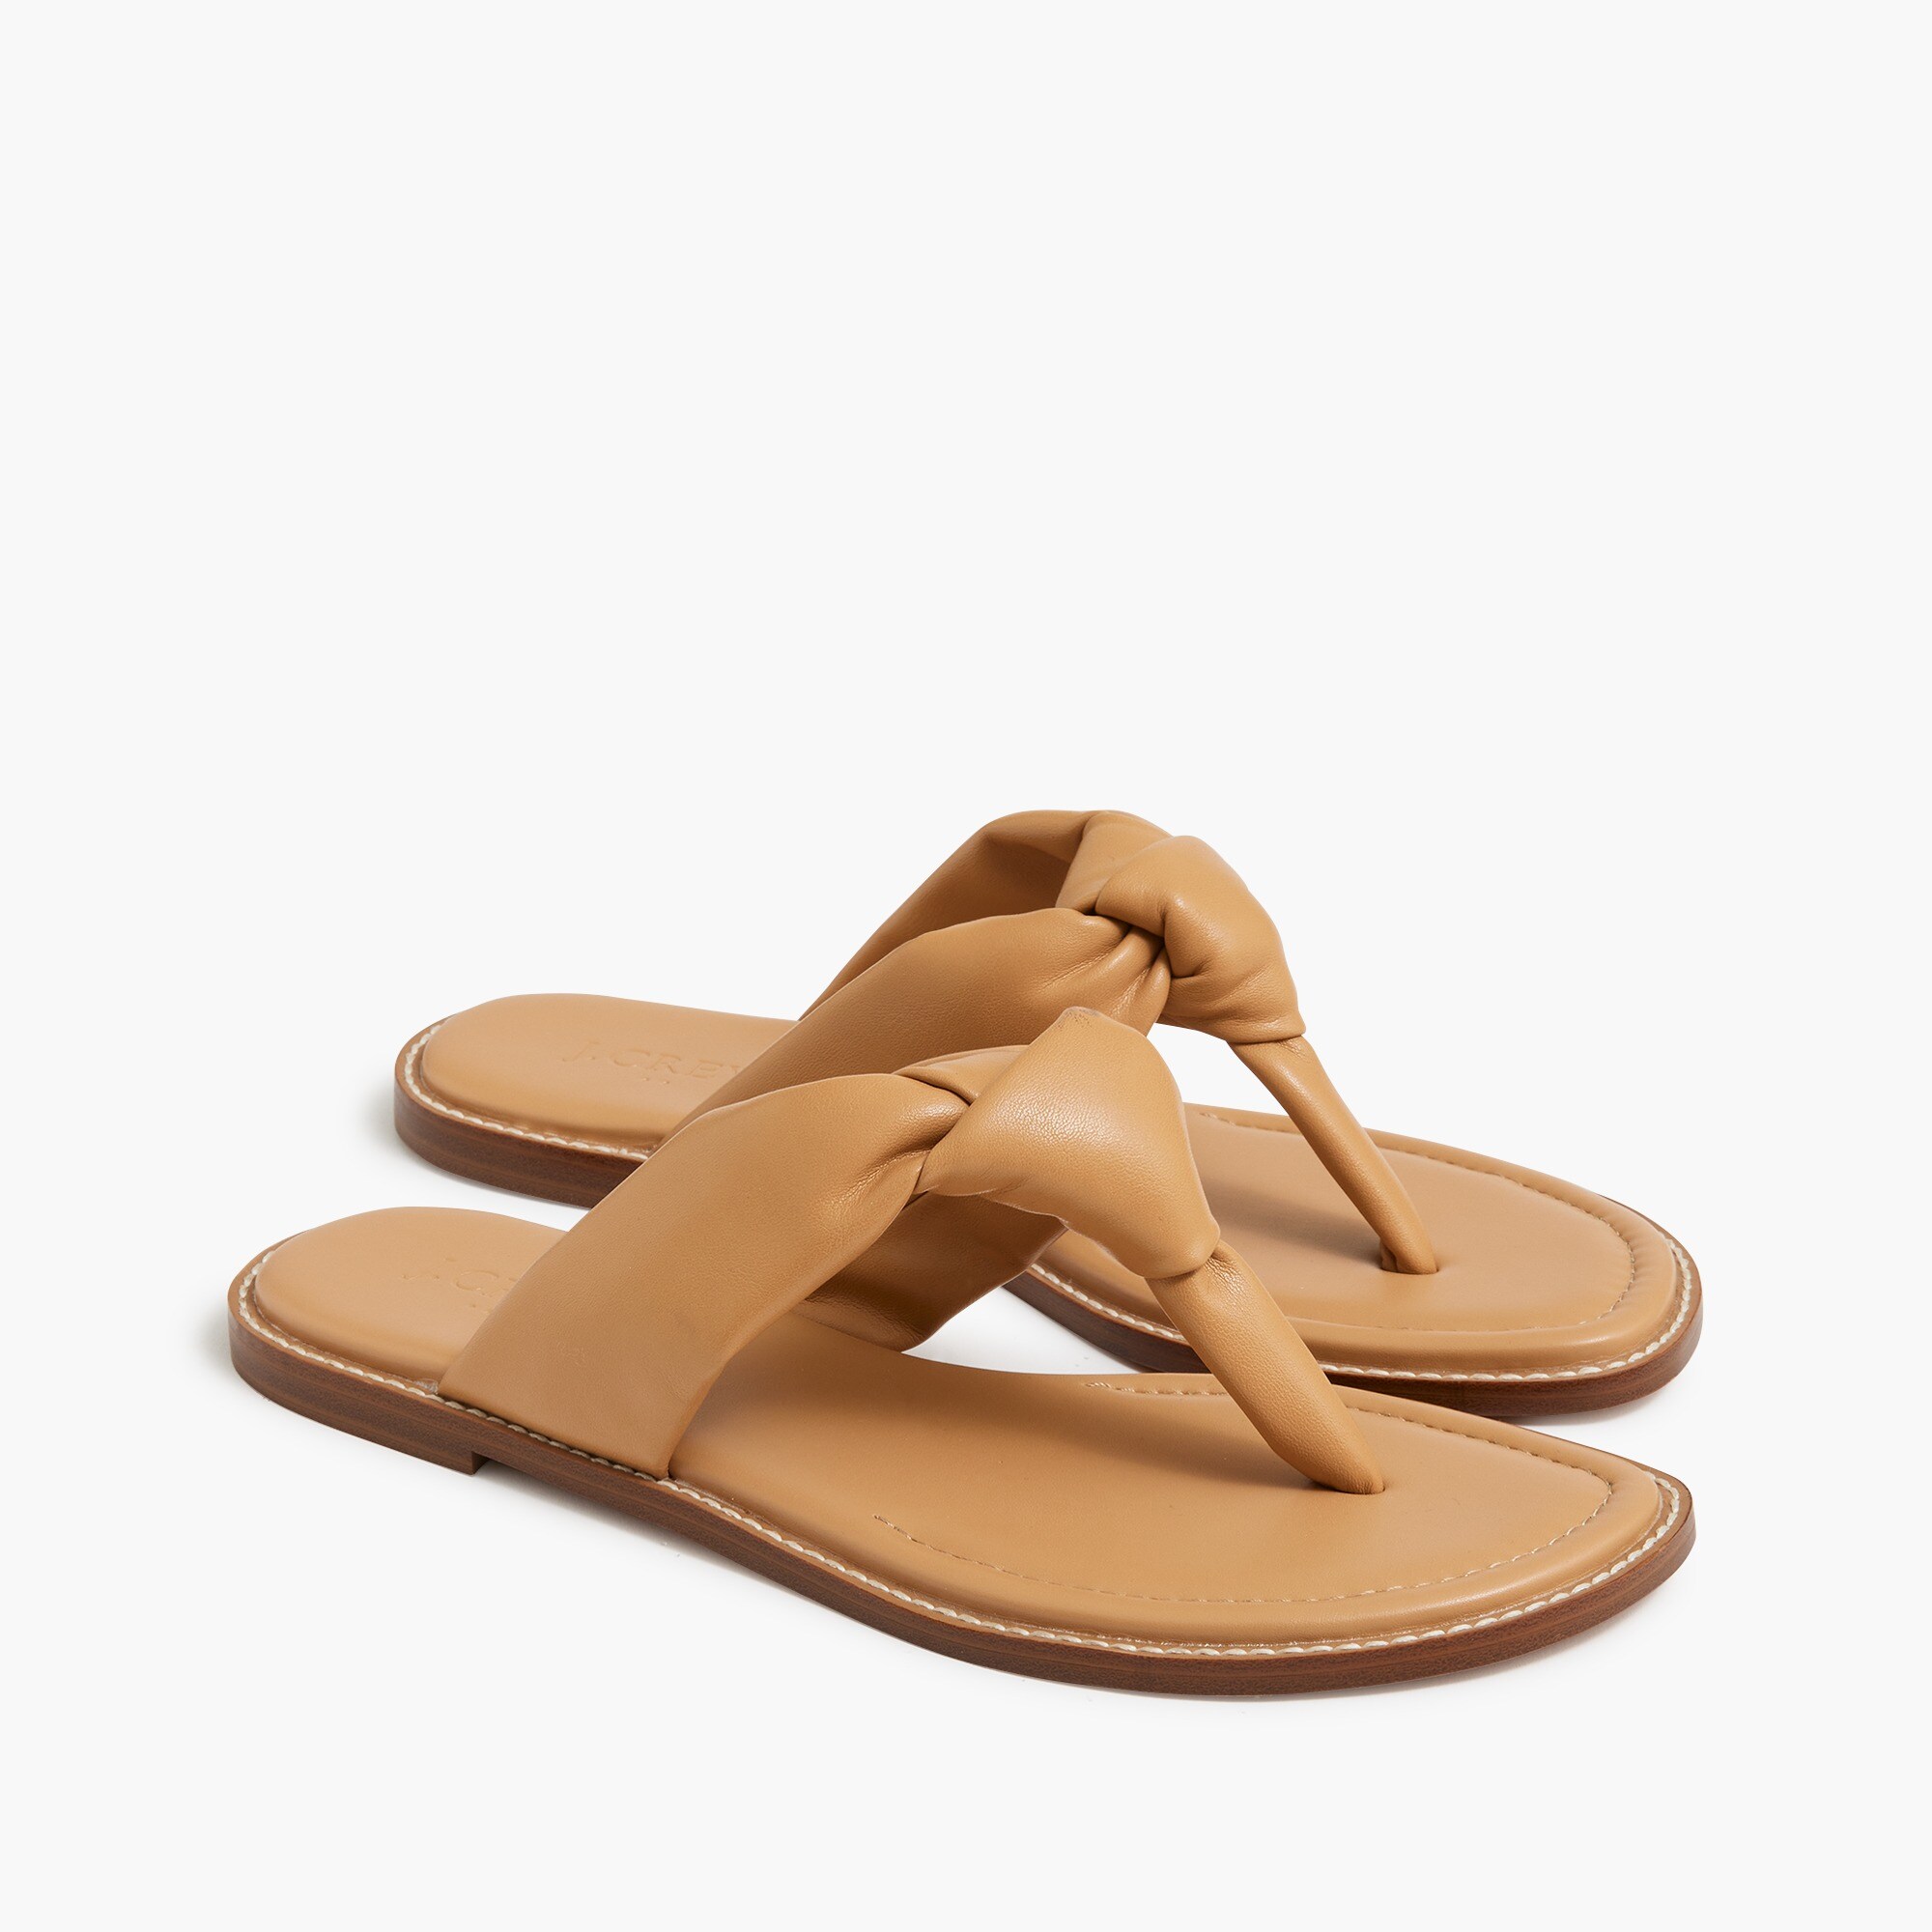  Knotted thong sandals